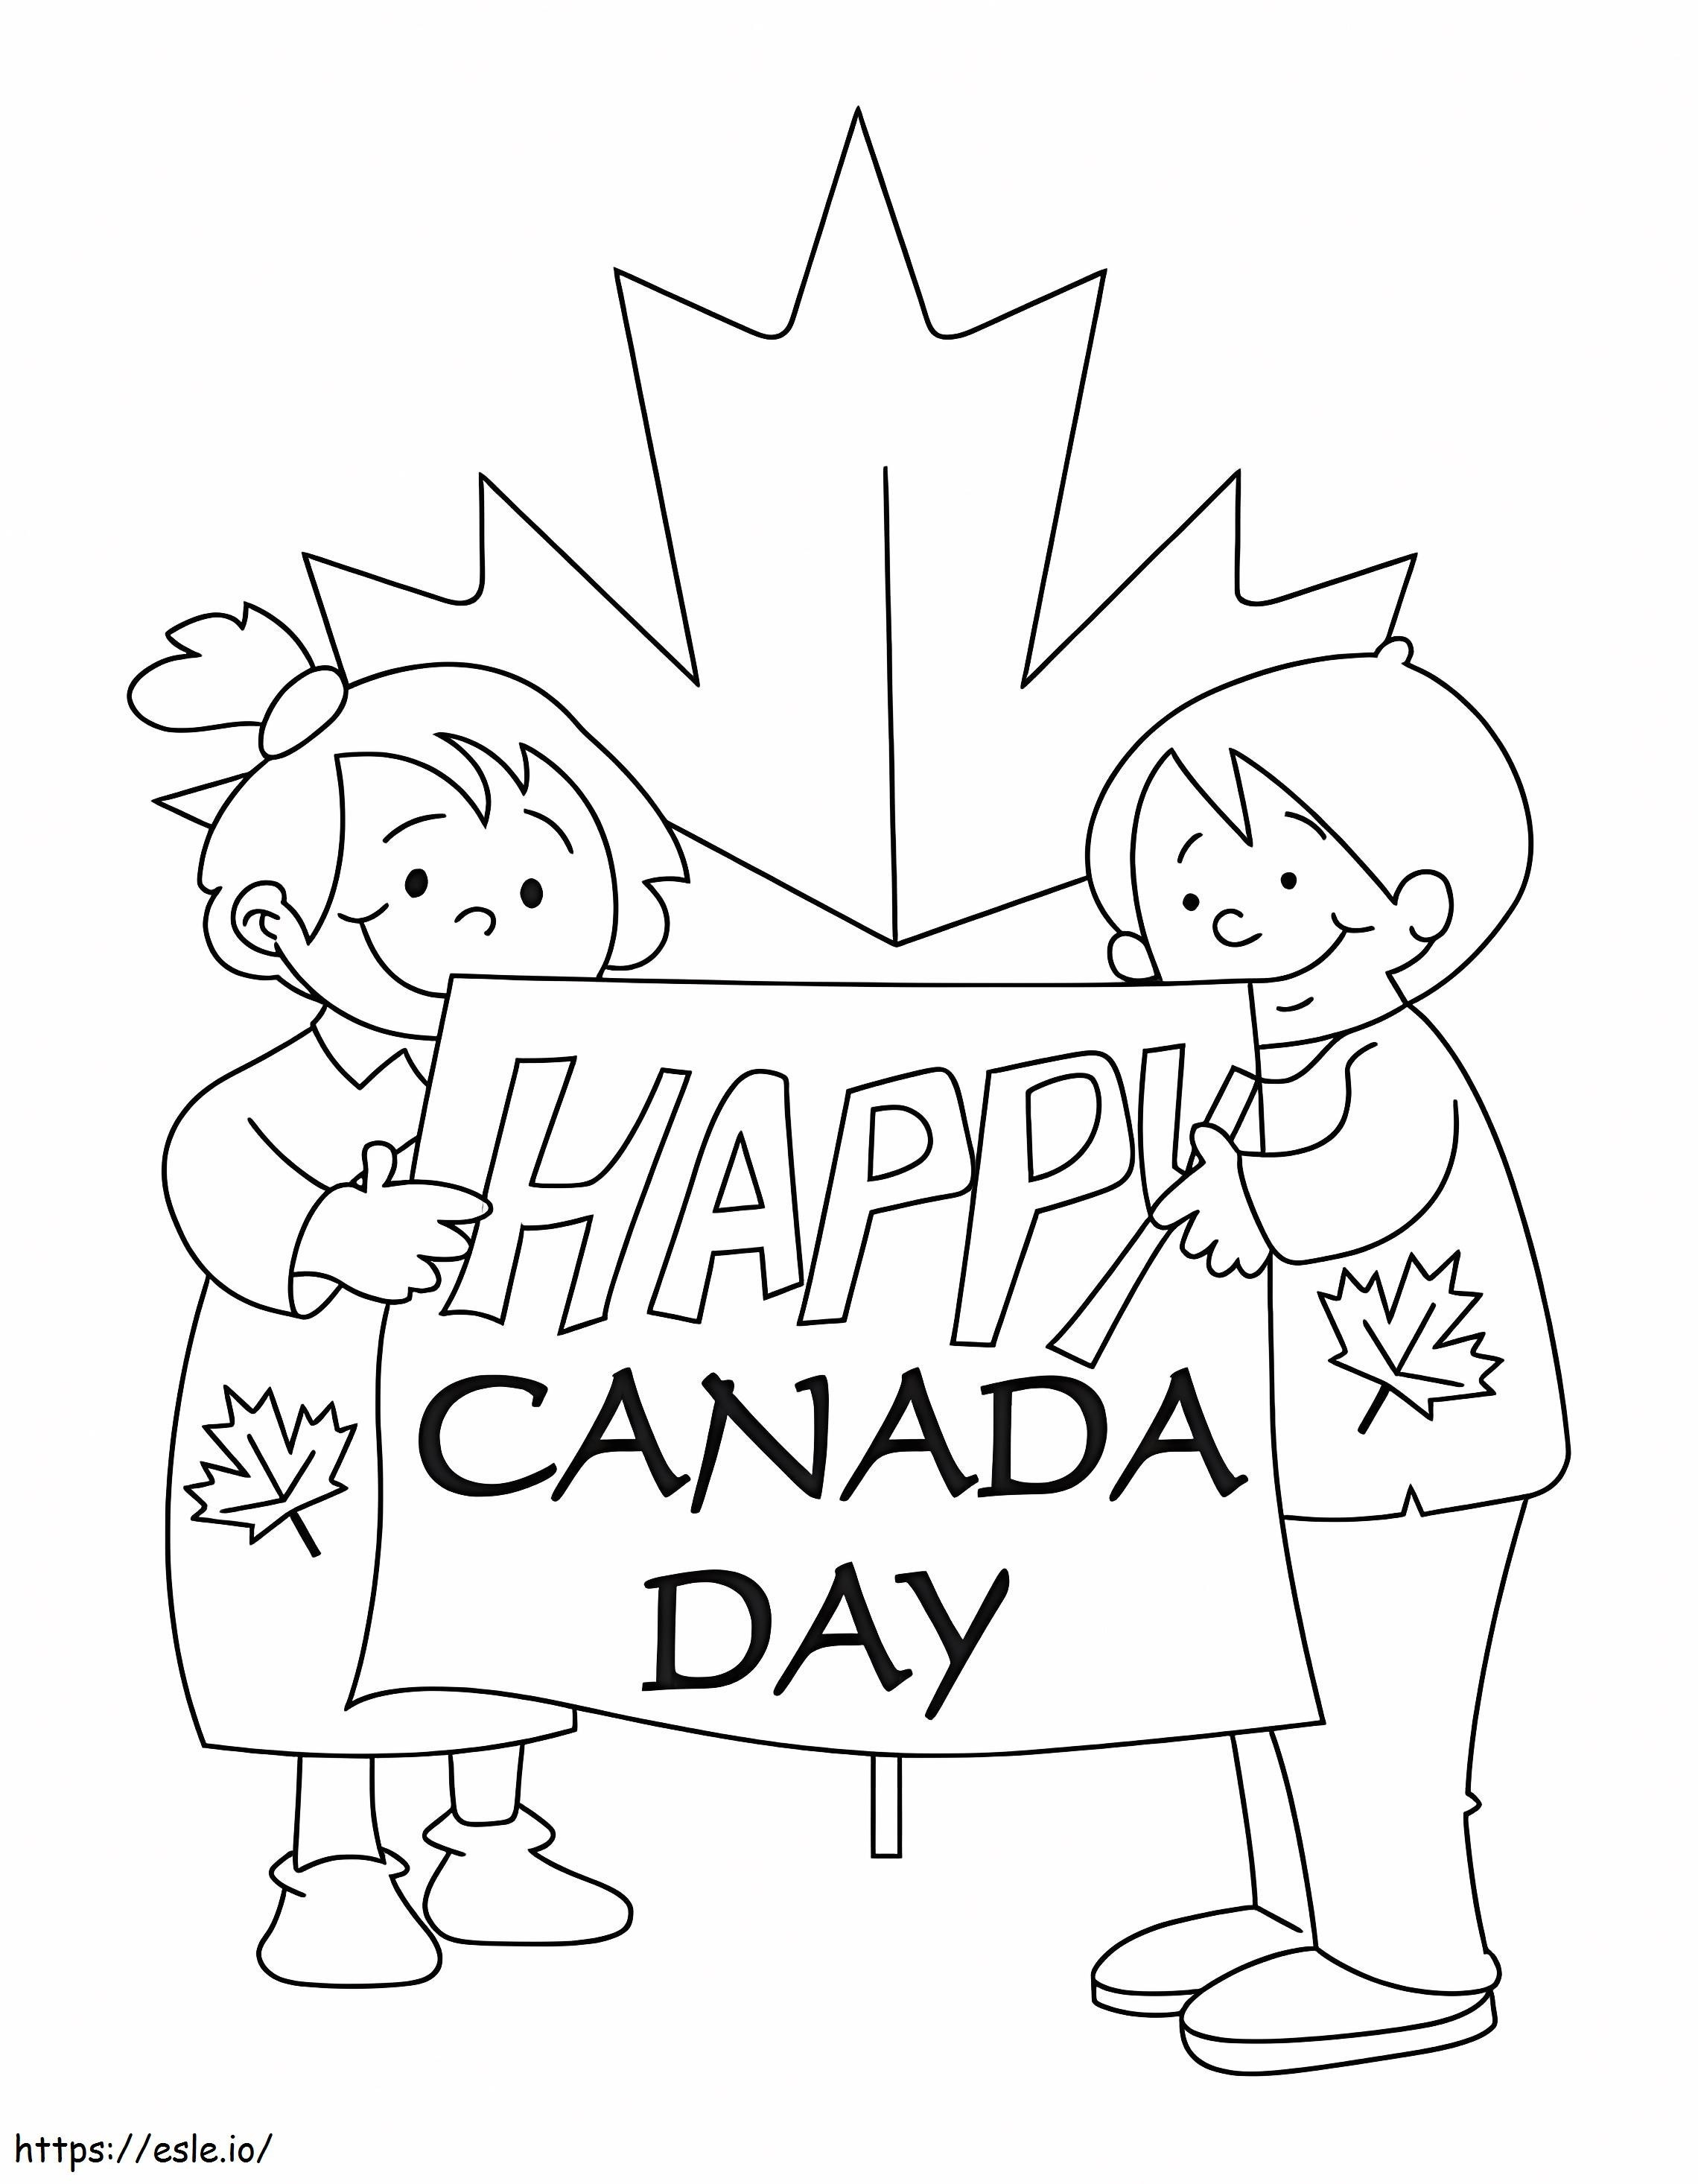 Happy Canada Day 8 coloring page